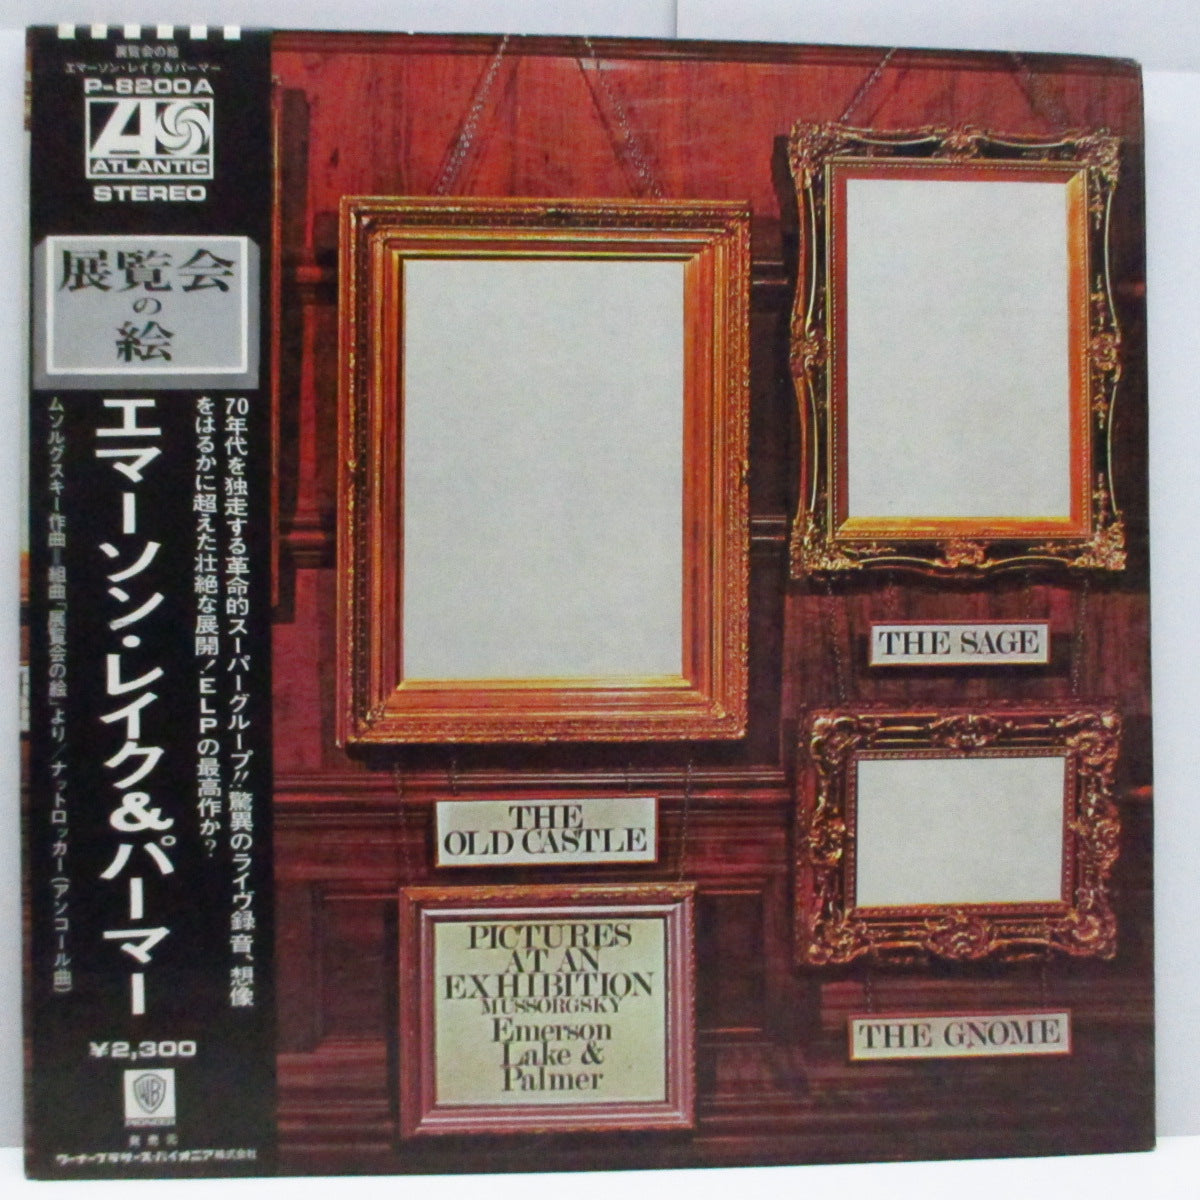 EMERSON, LAKE & PALMER (エマーソン、レイク&パーマー) - 展覧会の絵 : Pictures At An Exhibition  (Japan '74 Reissue LP/GS)